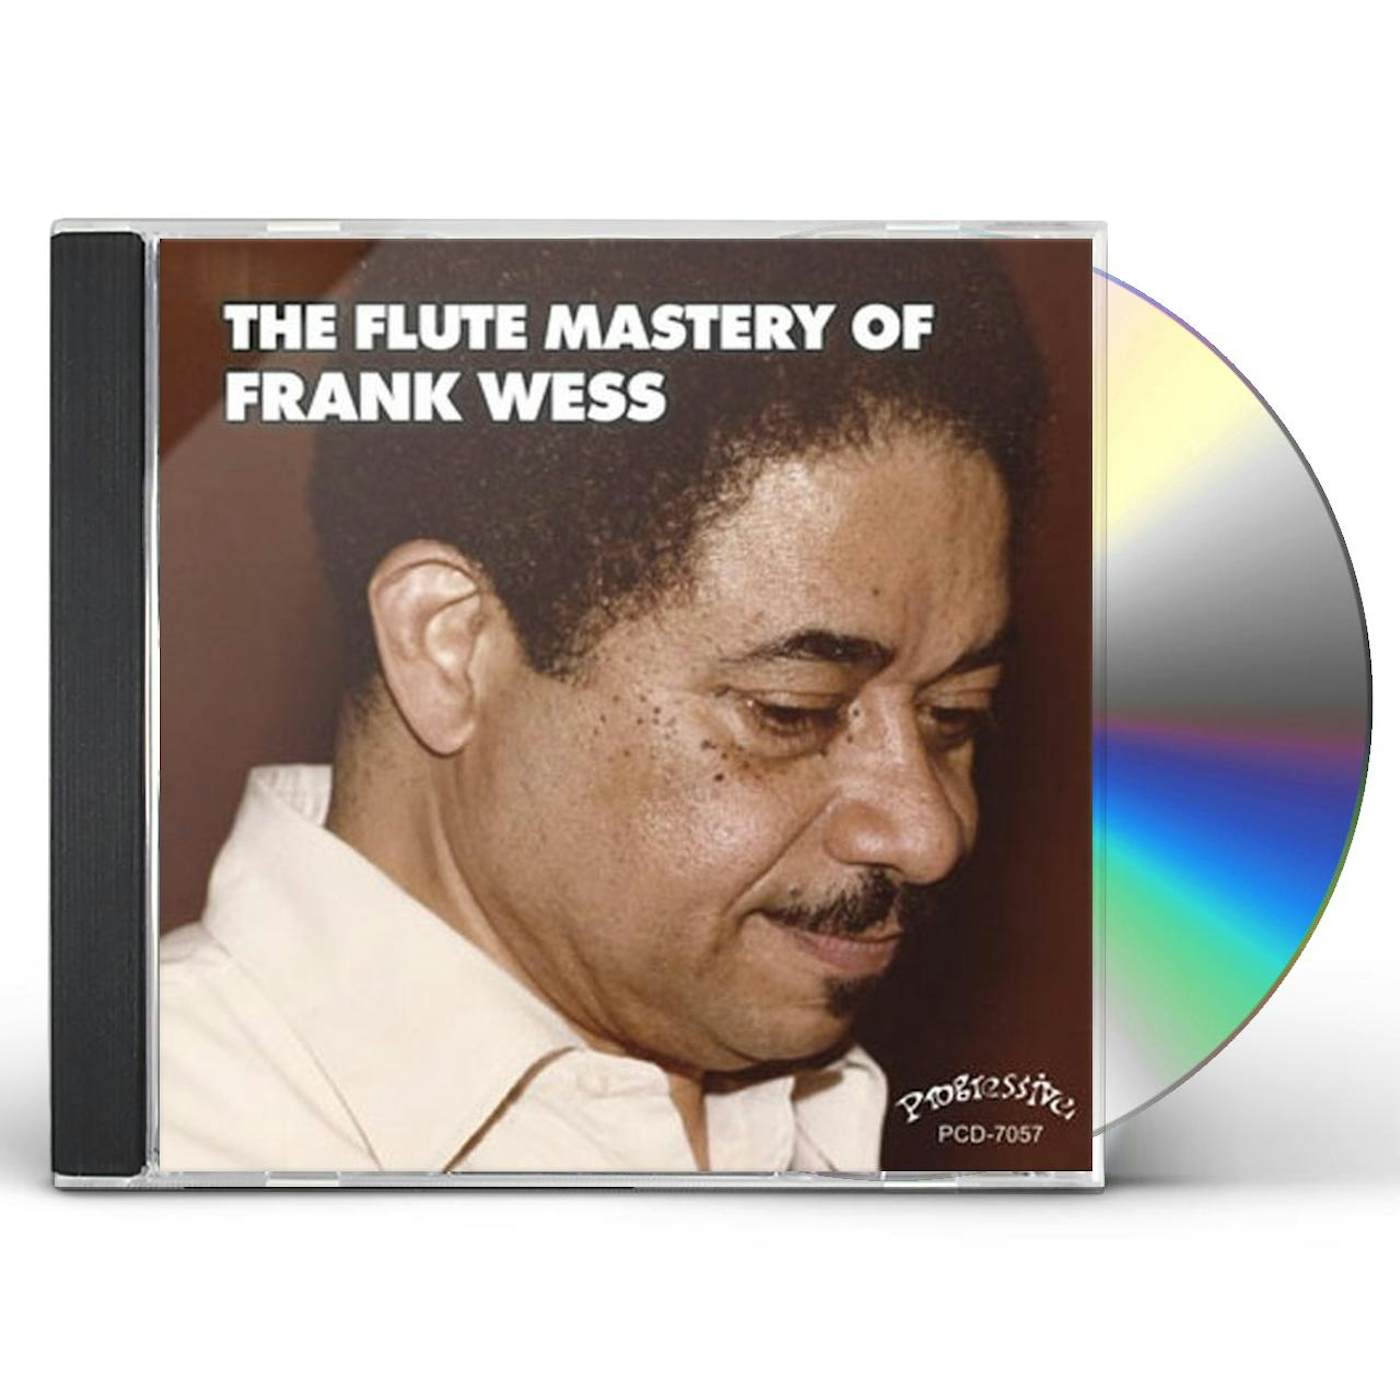 FLUTE MASTERY OF FRANK WESS CD